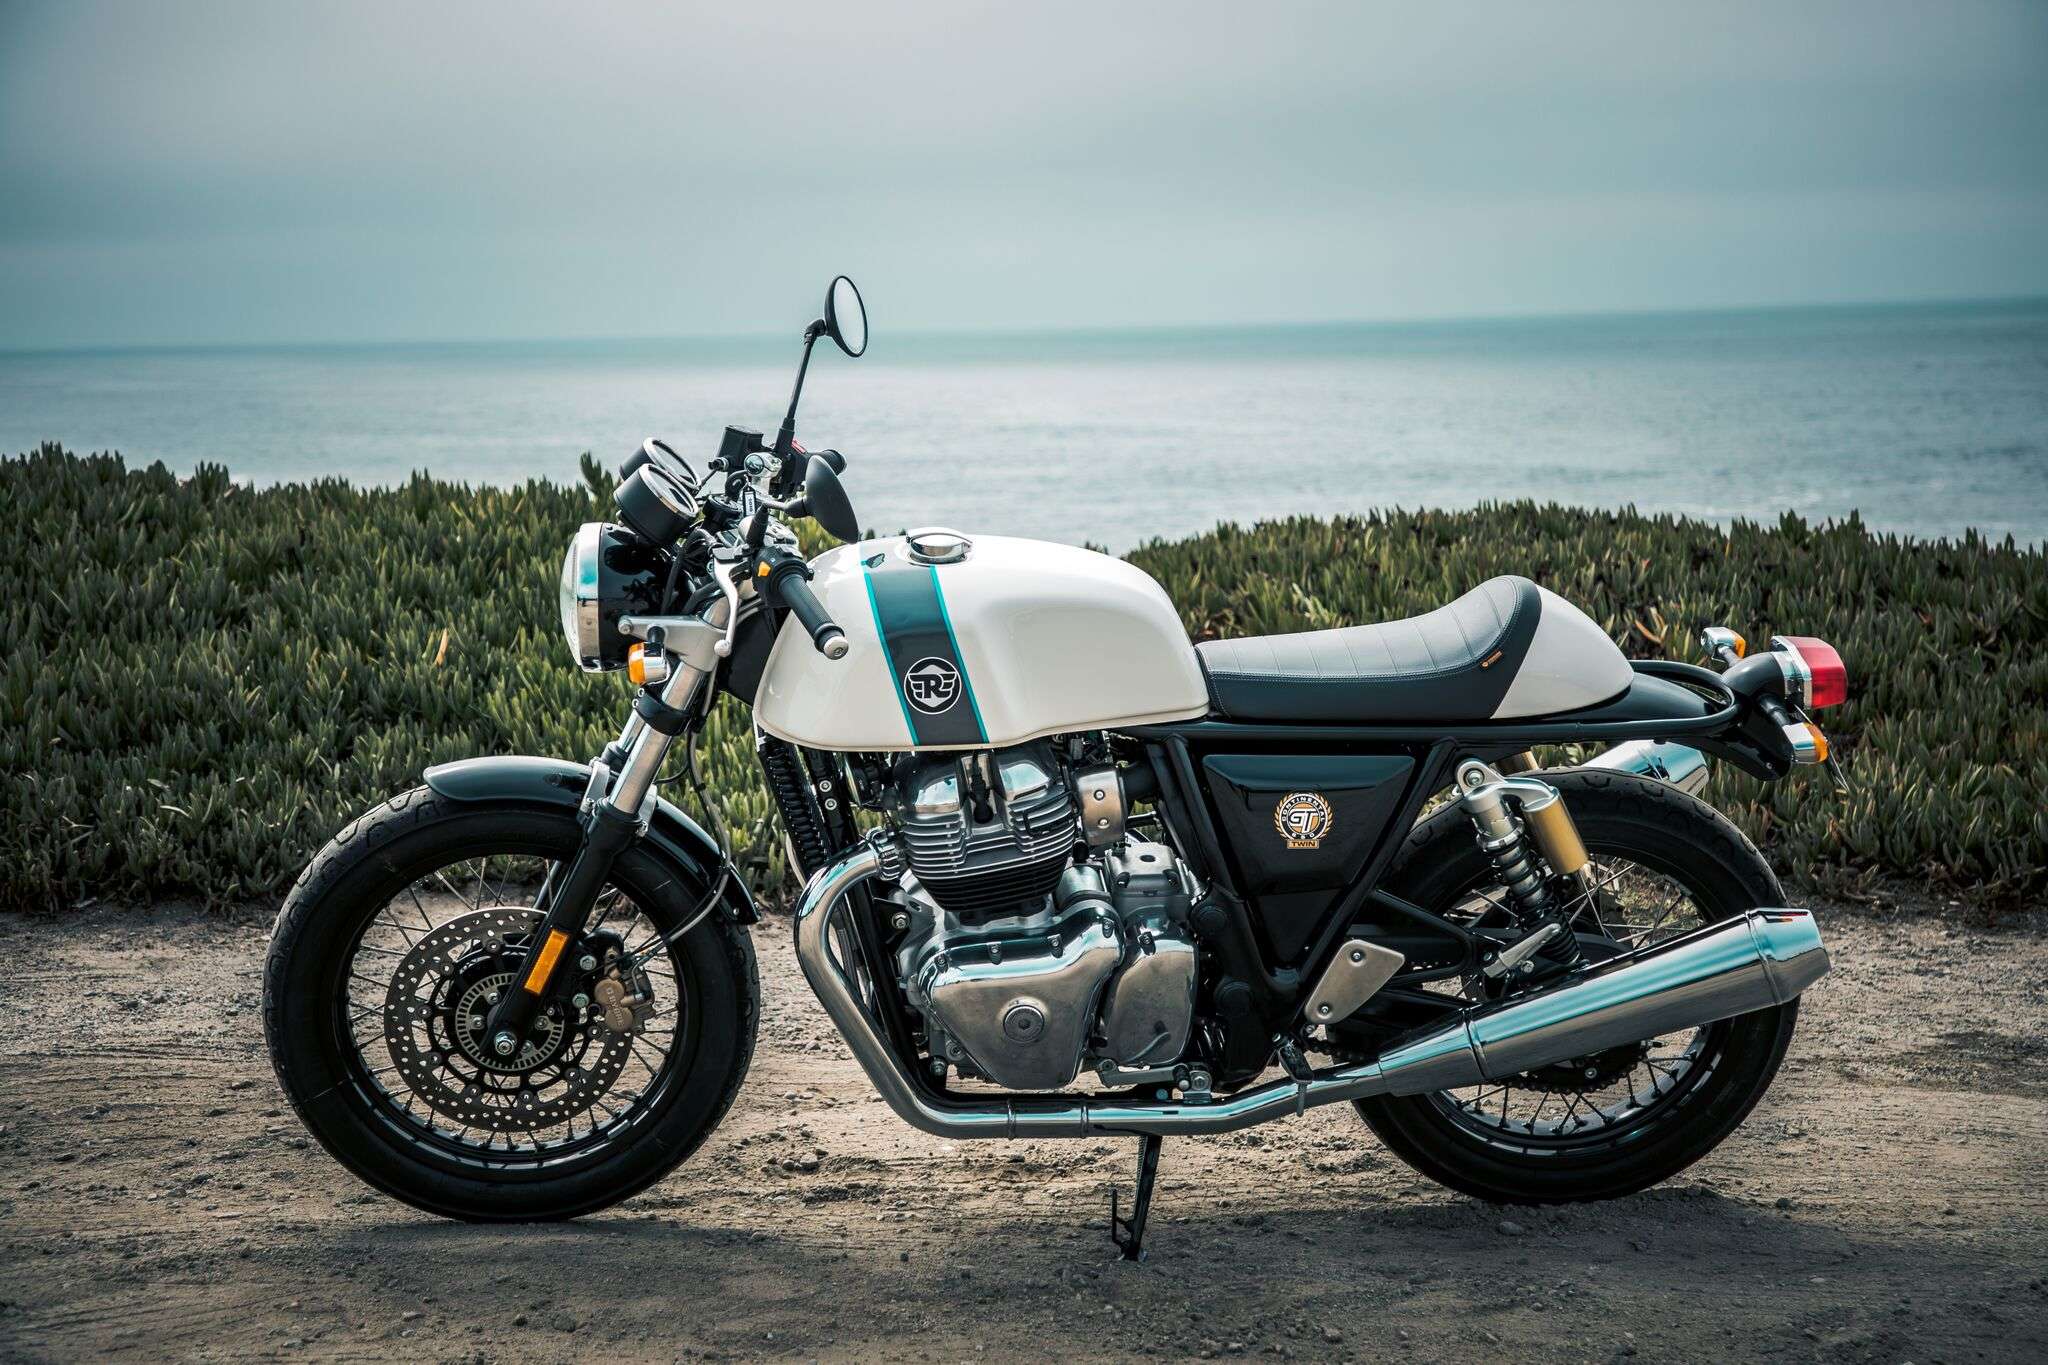 The 2019 Royal Enfield Twins Will Start at $799 in the US